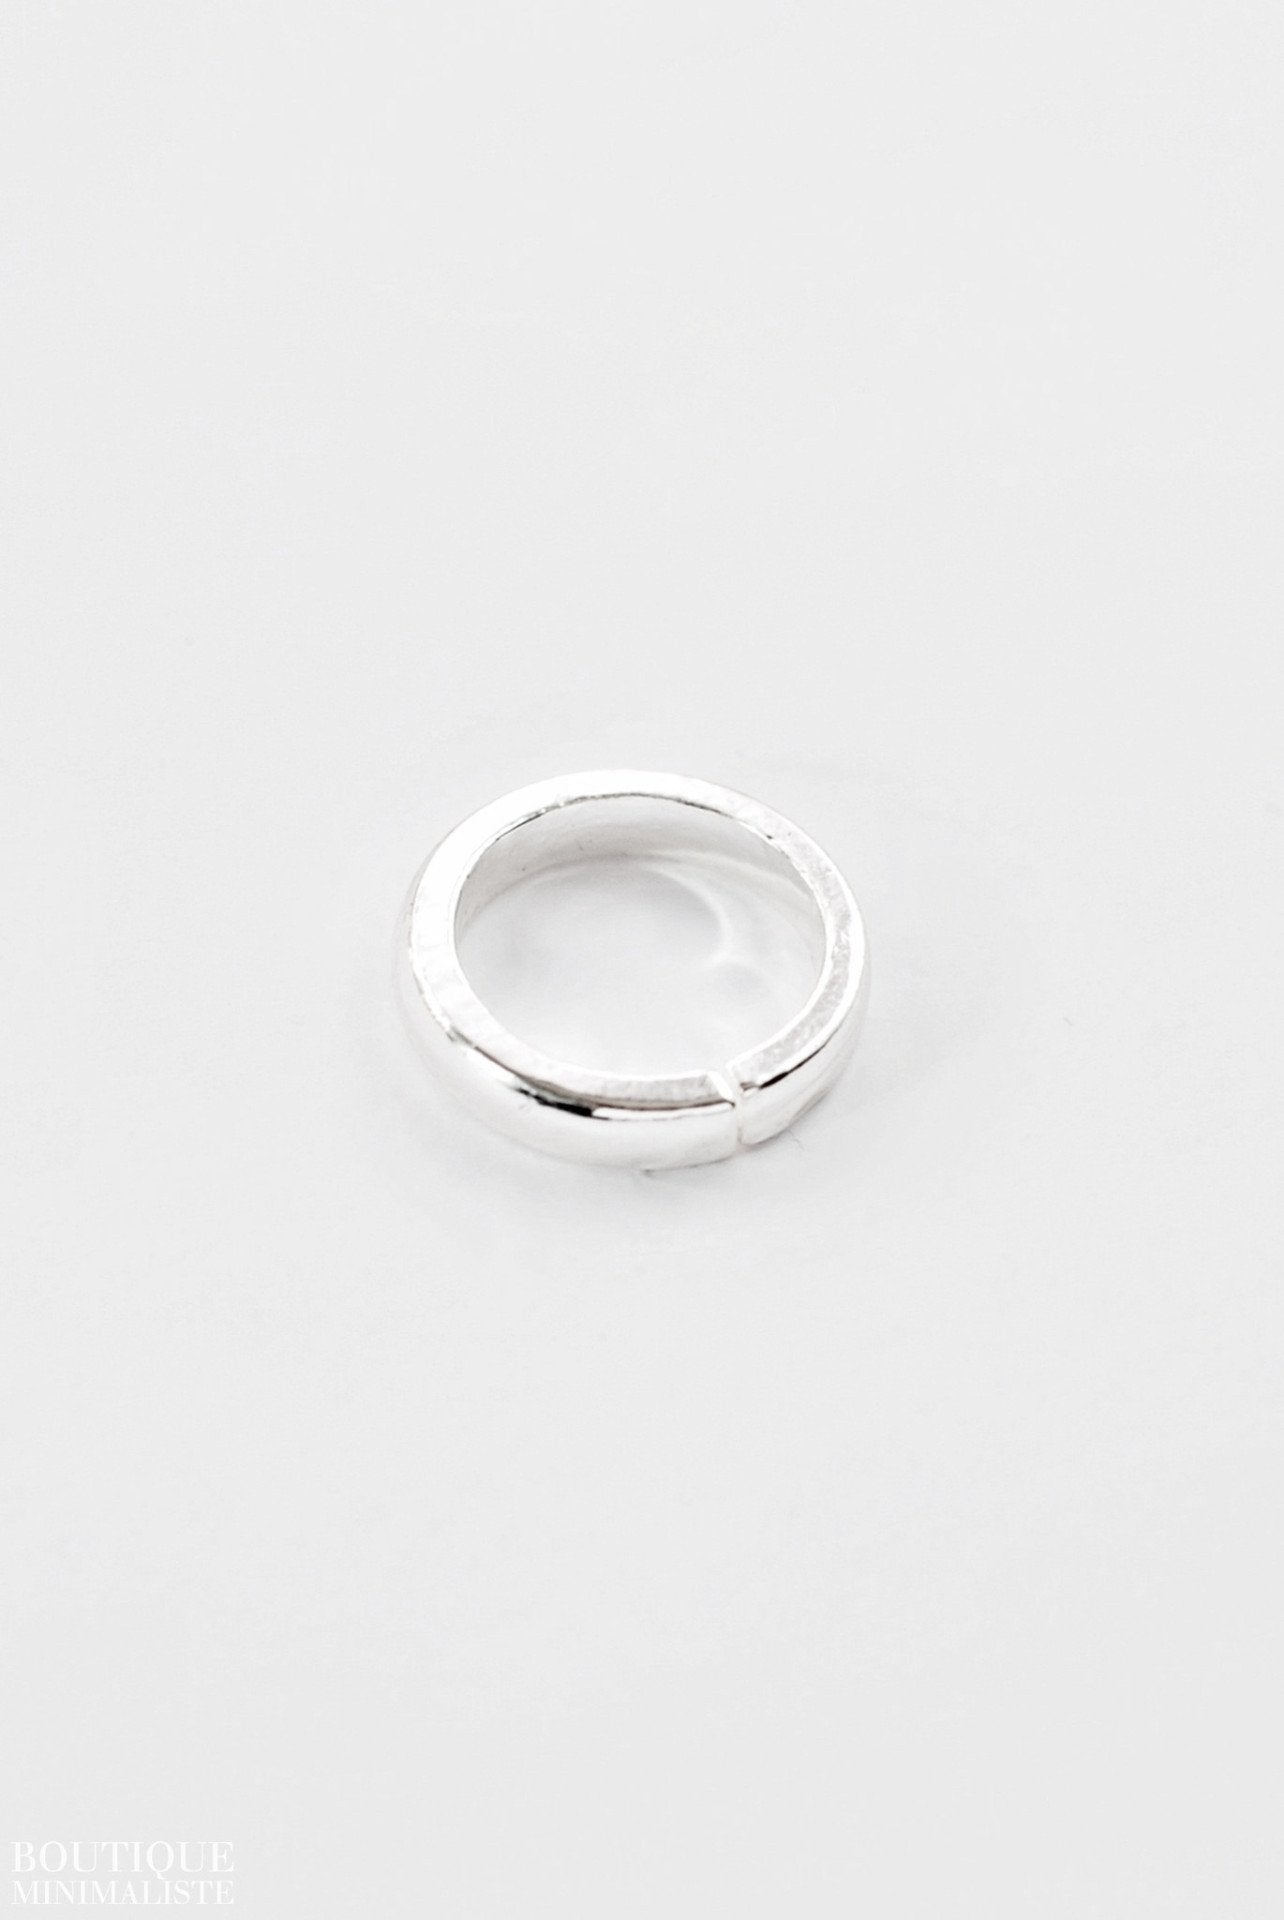 Thick Midi Ring - Boutique Minimaliste has waterproof, durable, elegant and vintage inspired jewelry